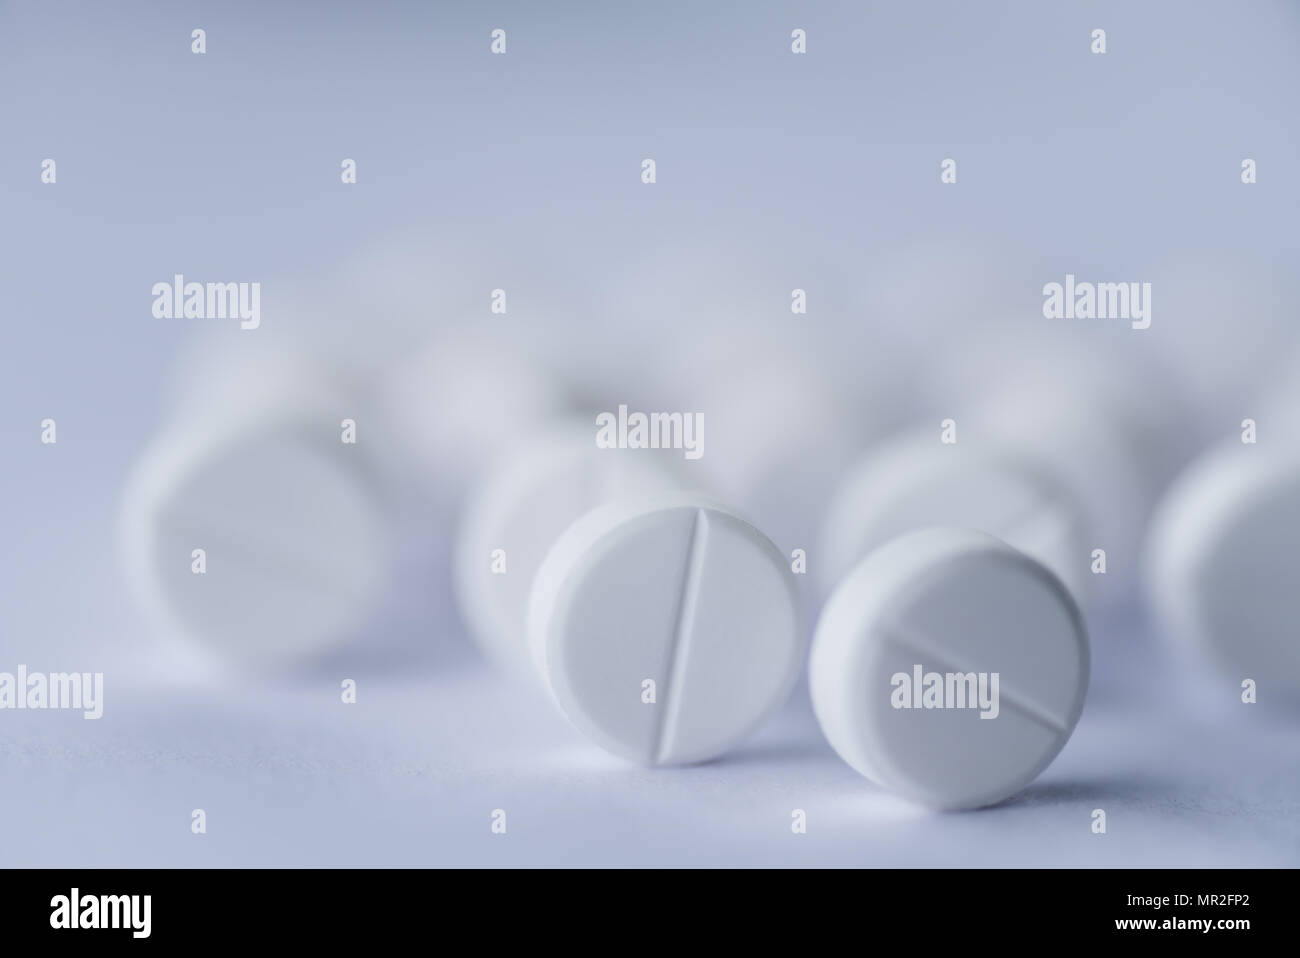 Soft focus white pills, aspirin on white background. Medical and health care concept. Stock Photo